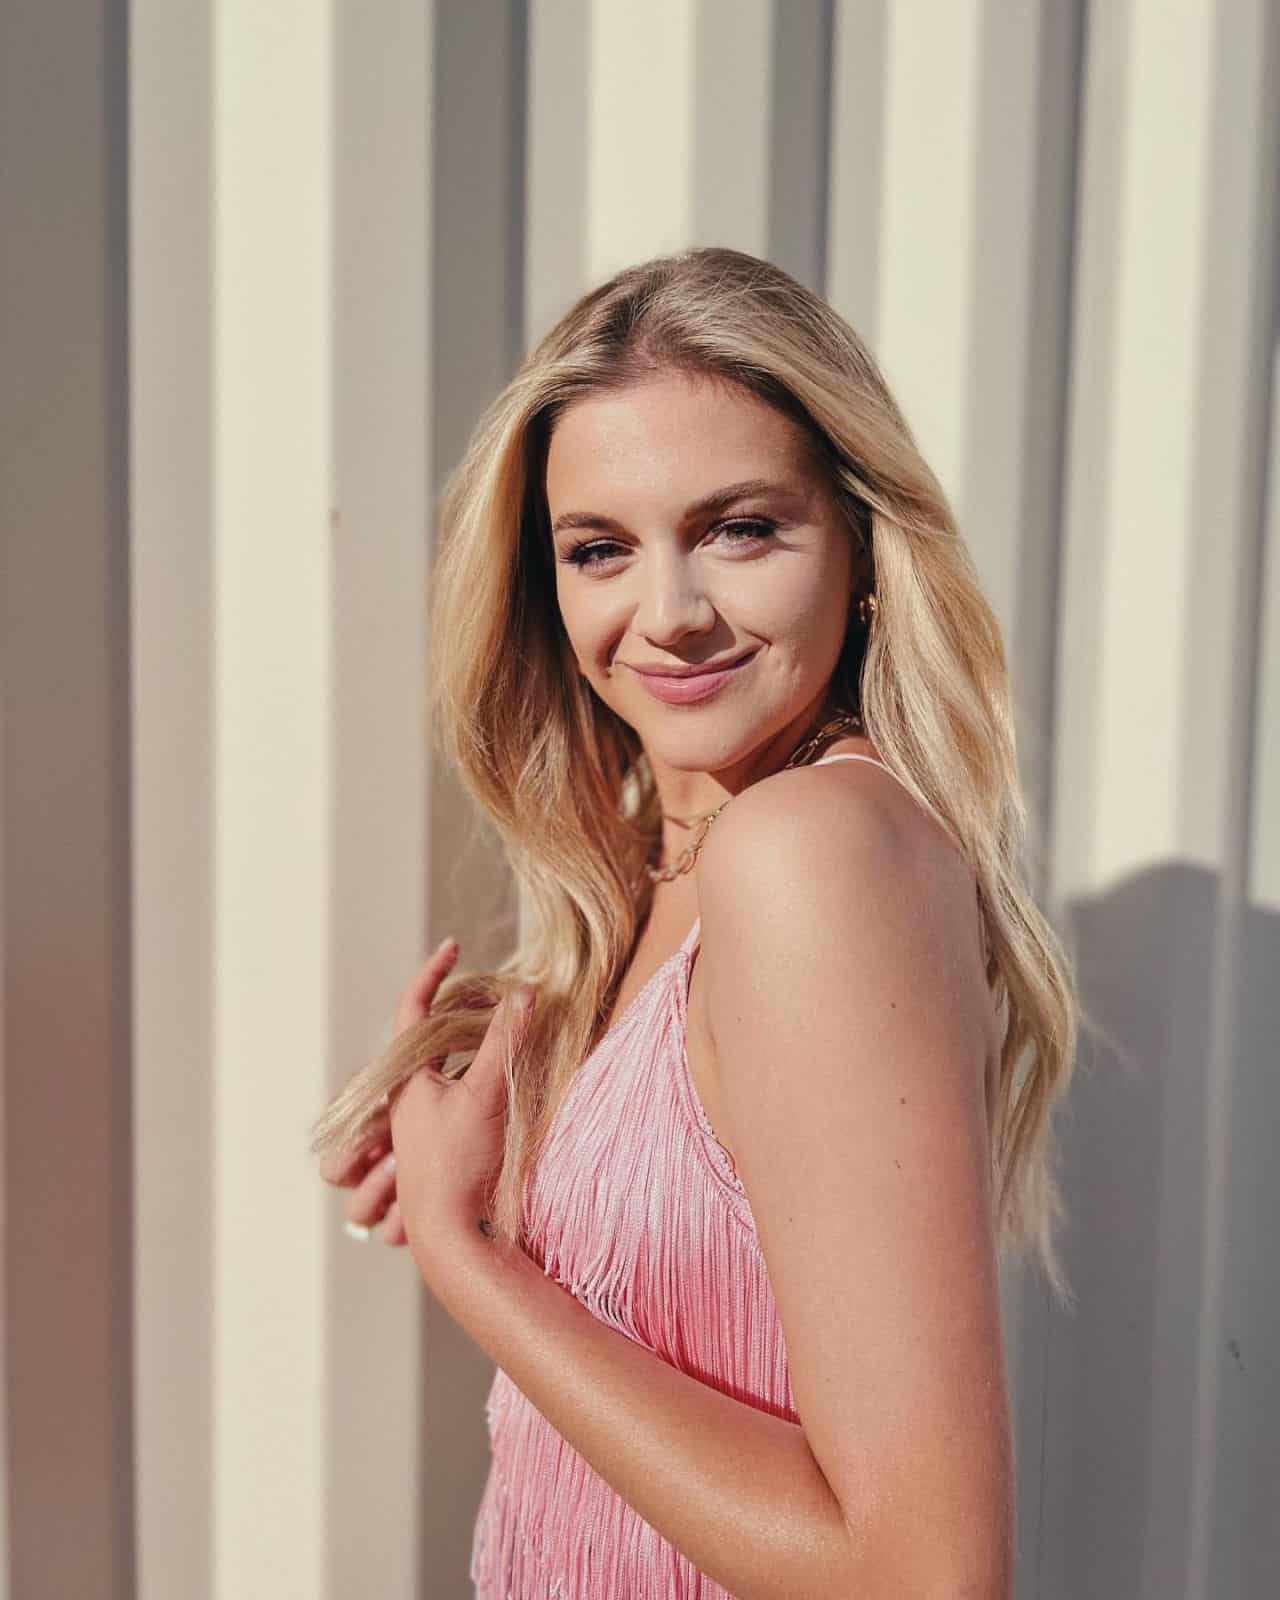 Kelsea Ballerini Posing in a Variety of Outfits on Social Media